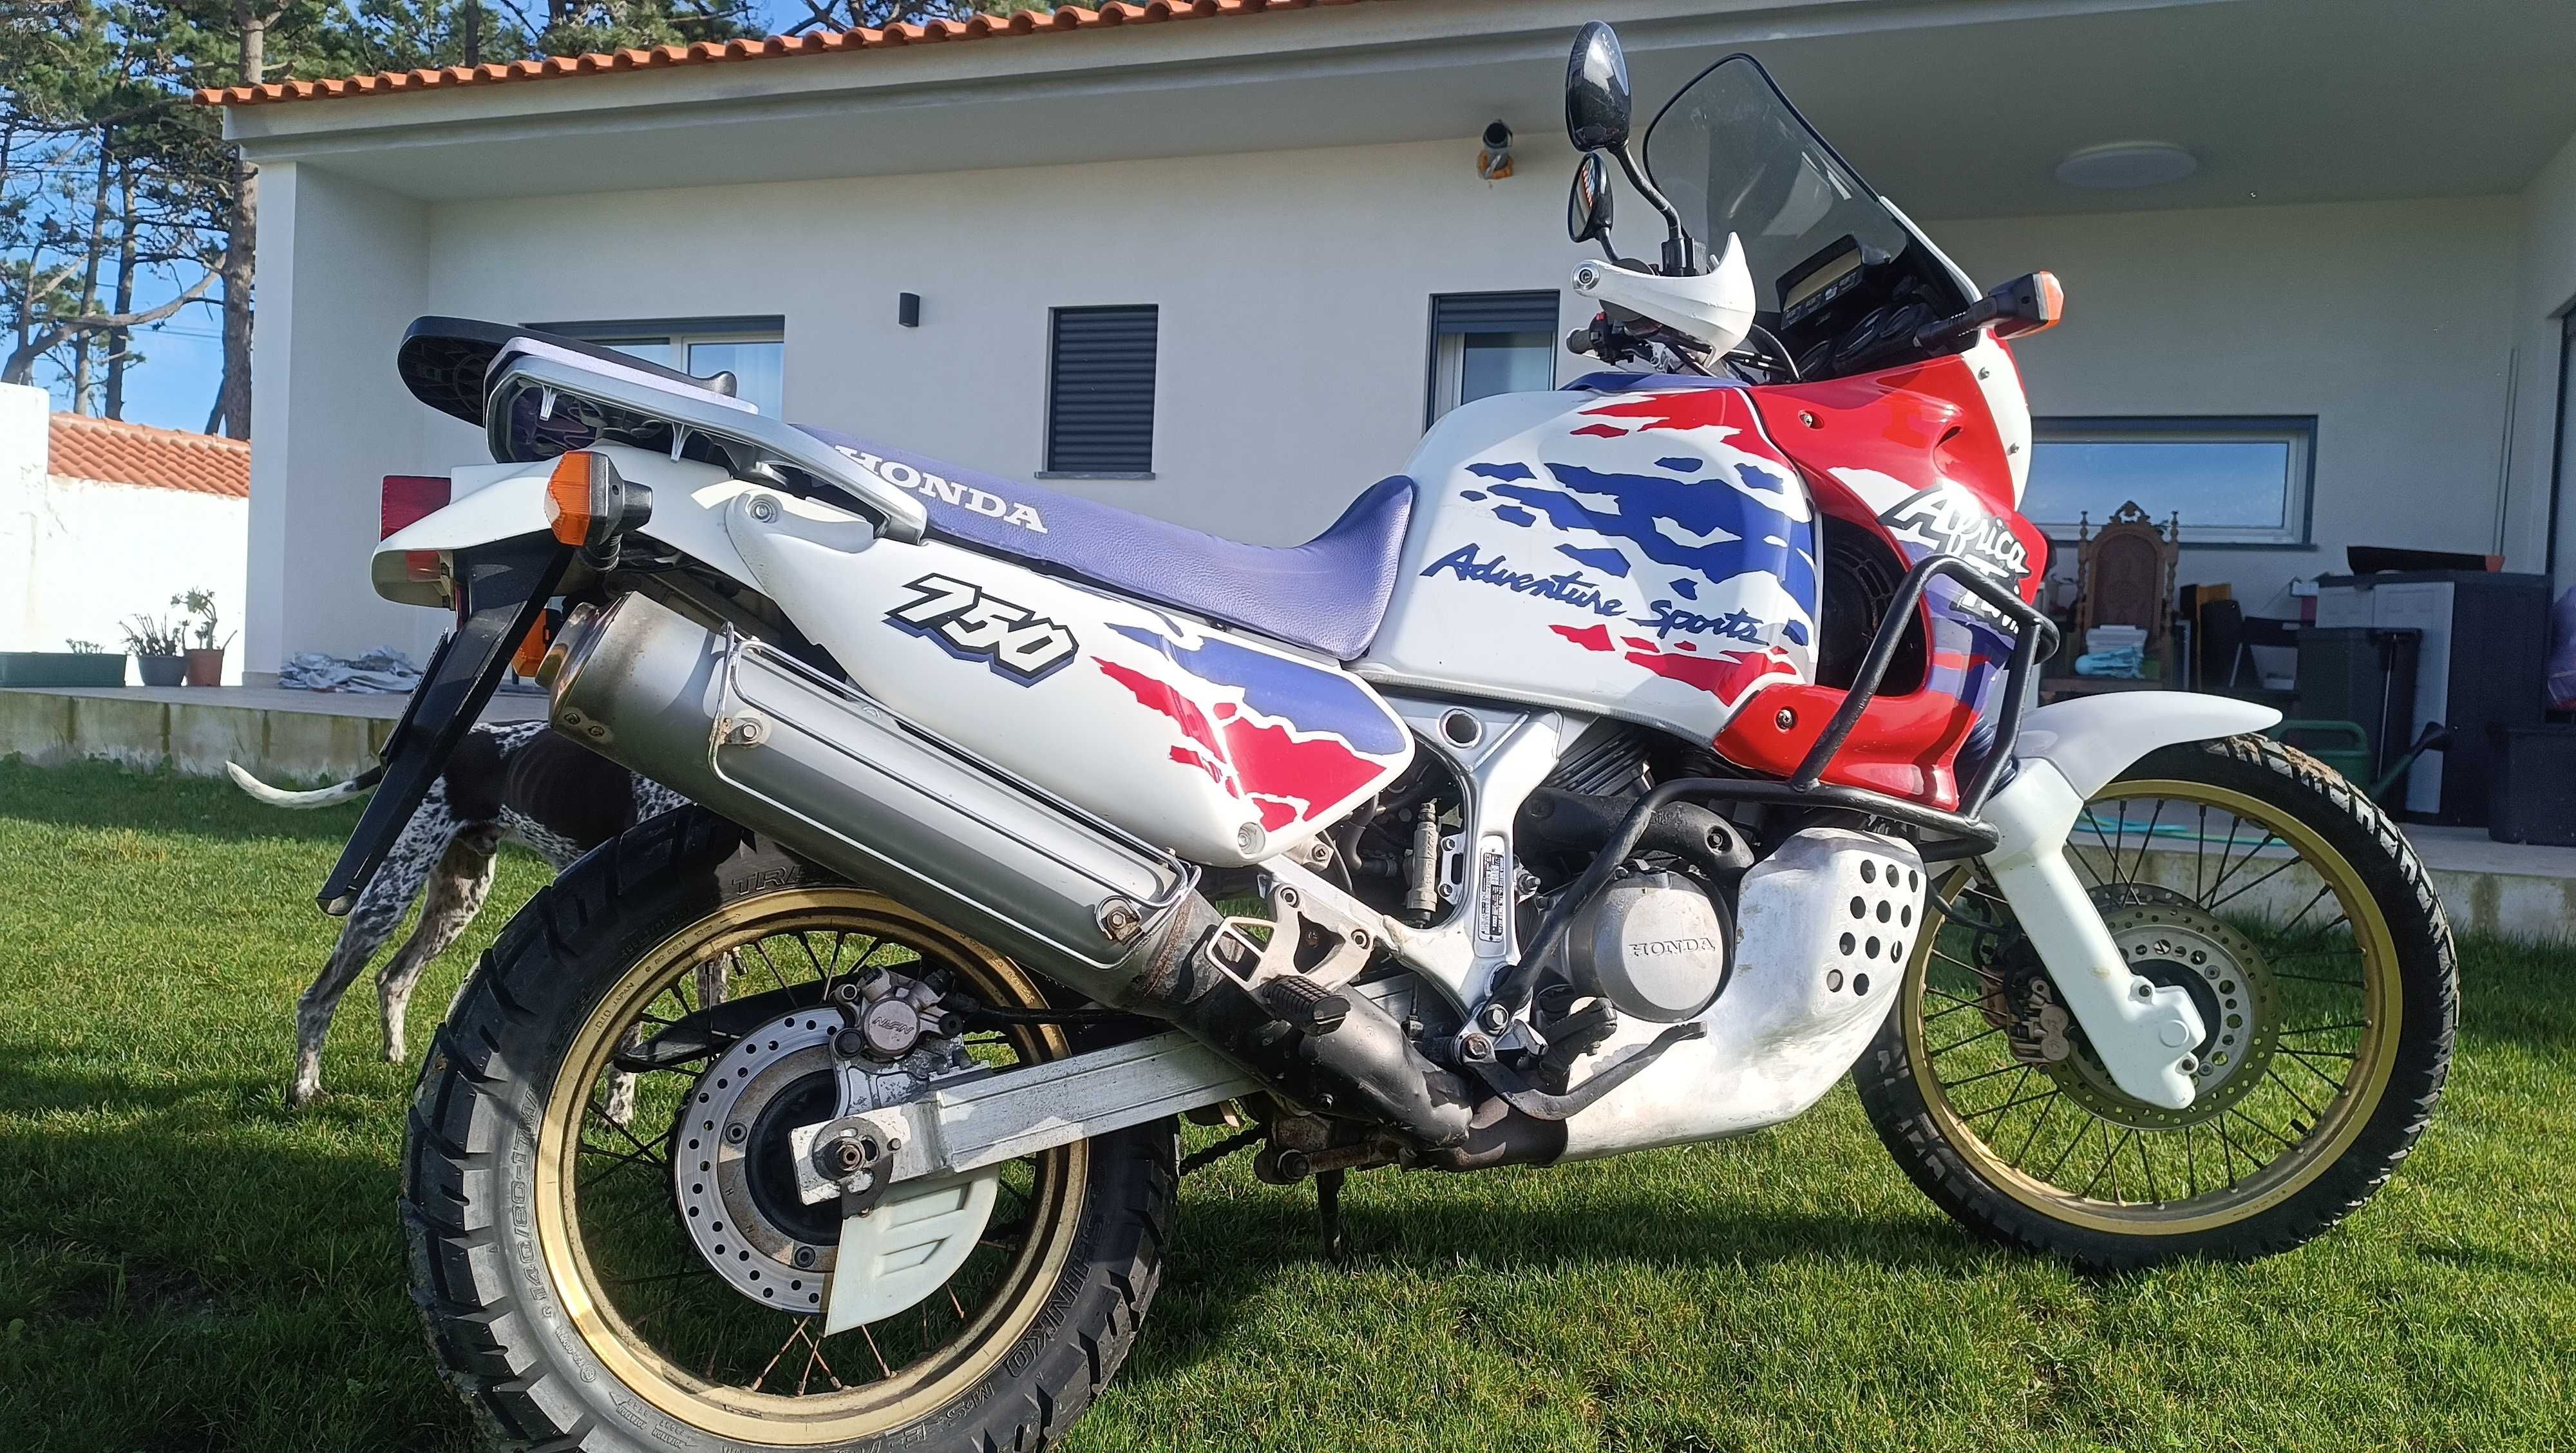 Africa Twin RD07